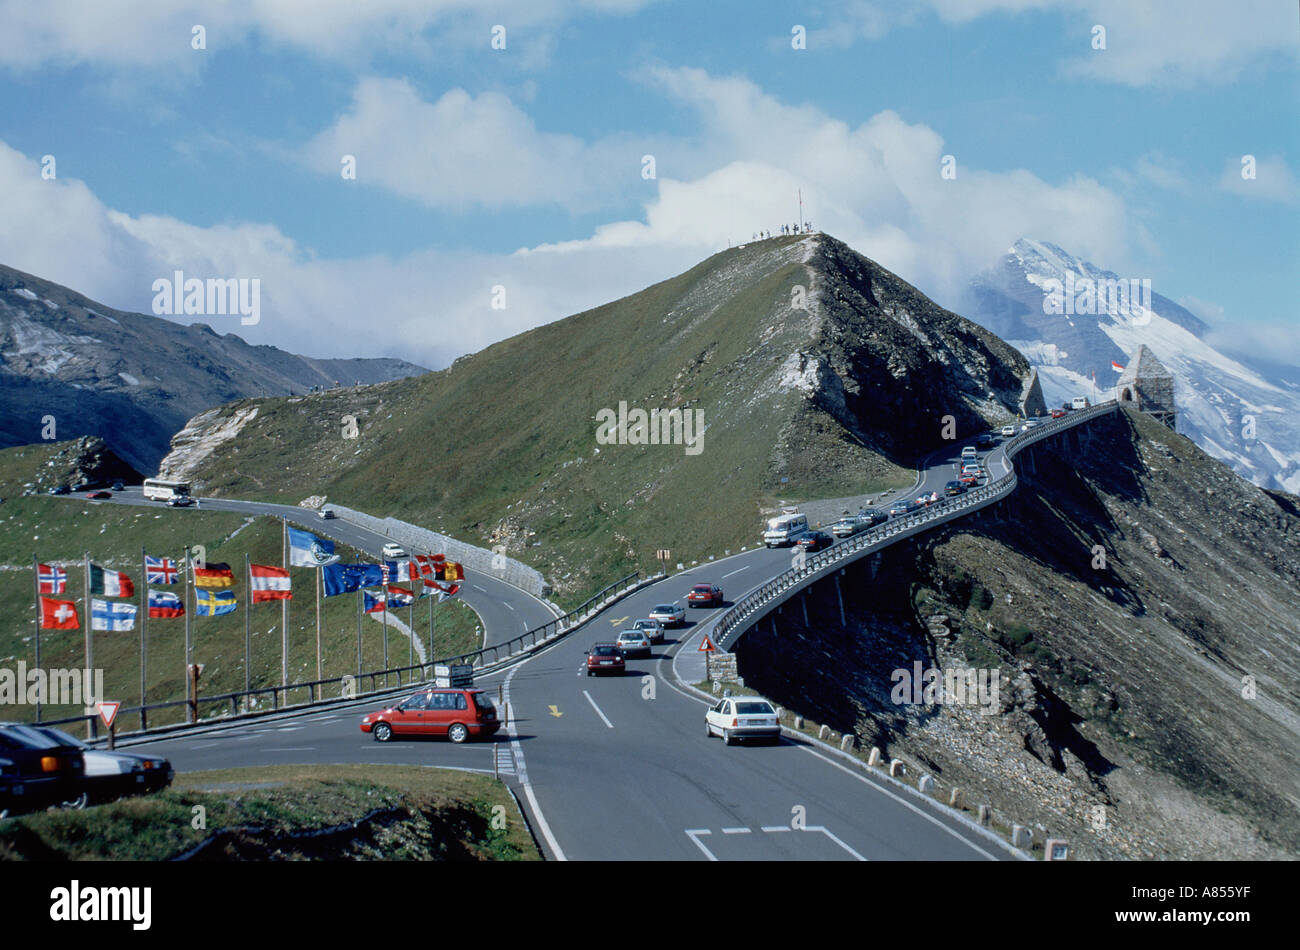 Austria. Historical image of mountain pass. Alps. Grossglockner high alpine road with vehicles circa 1985. Stock Photo